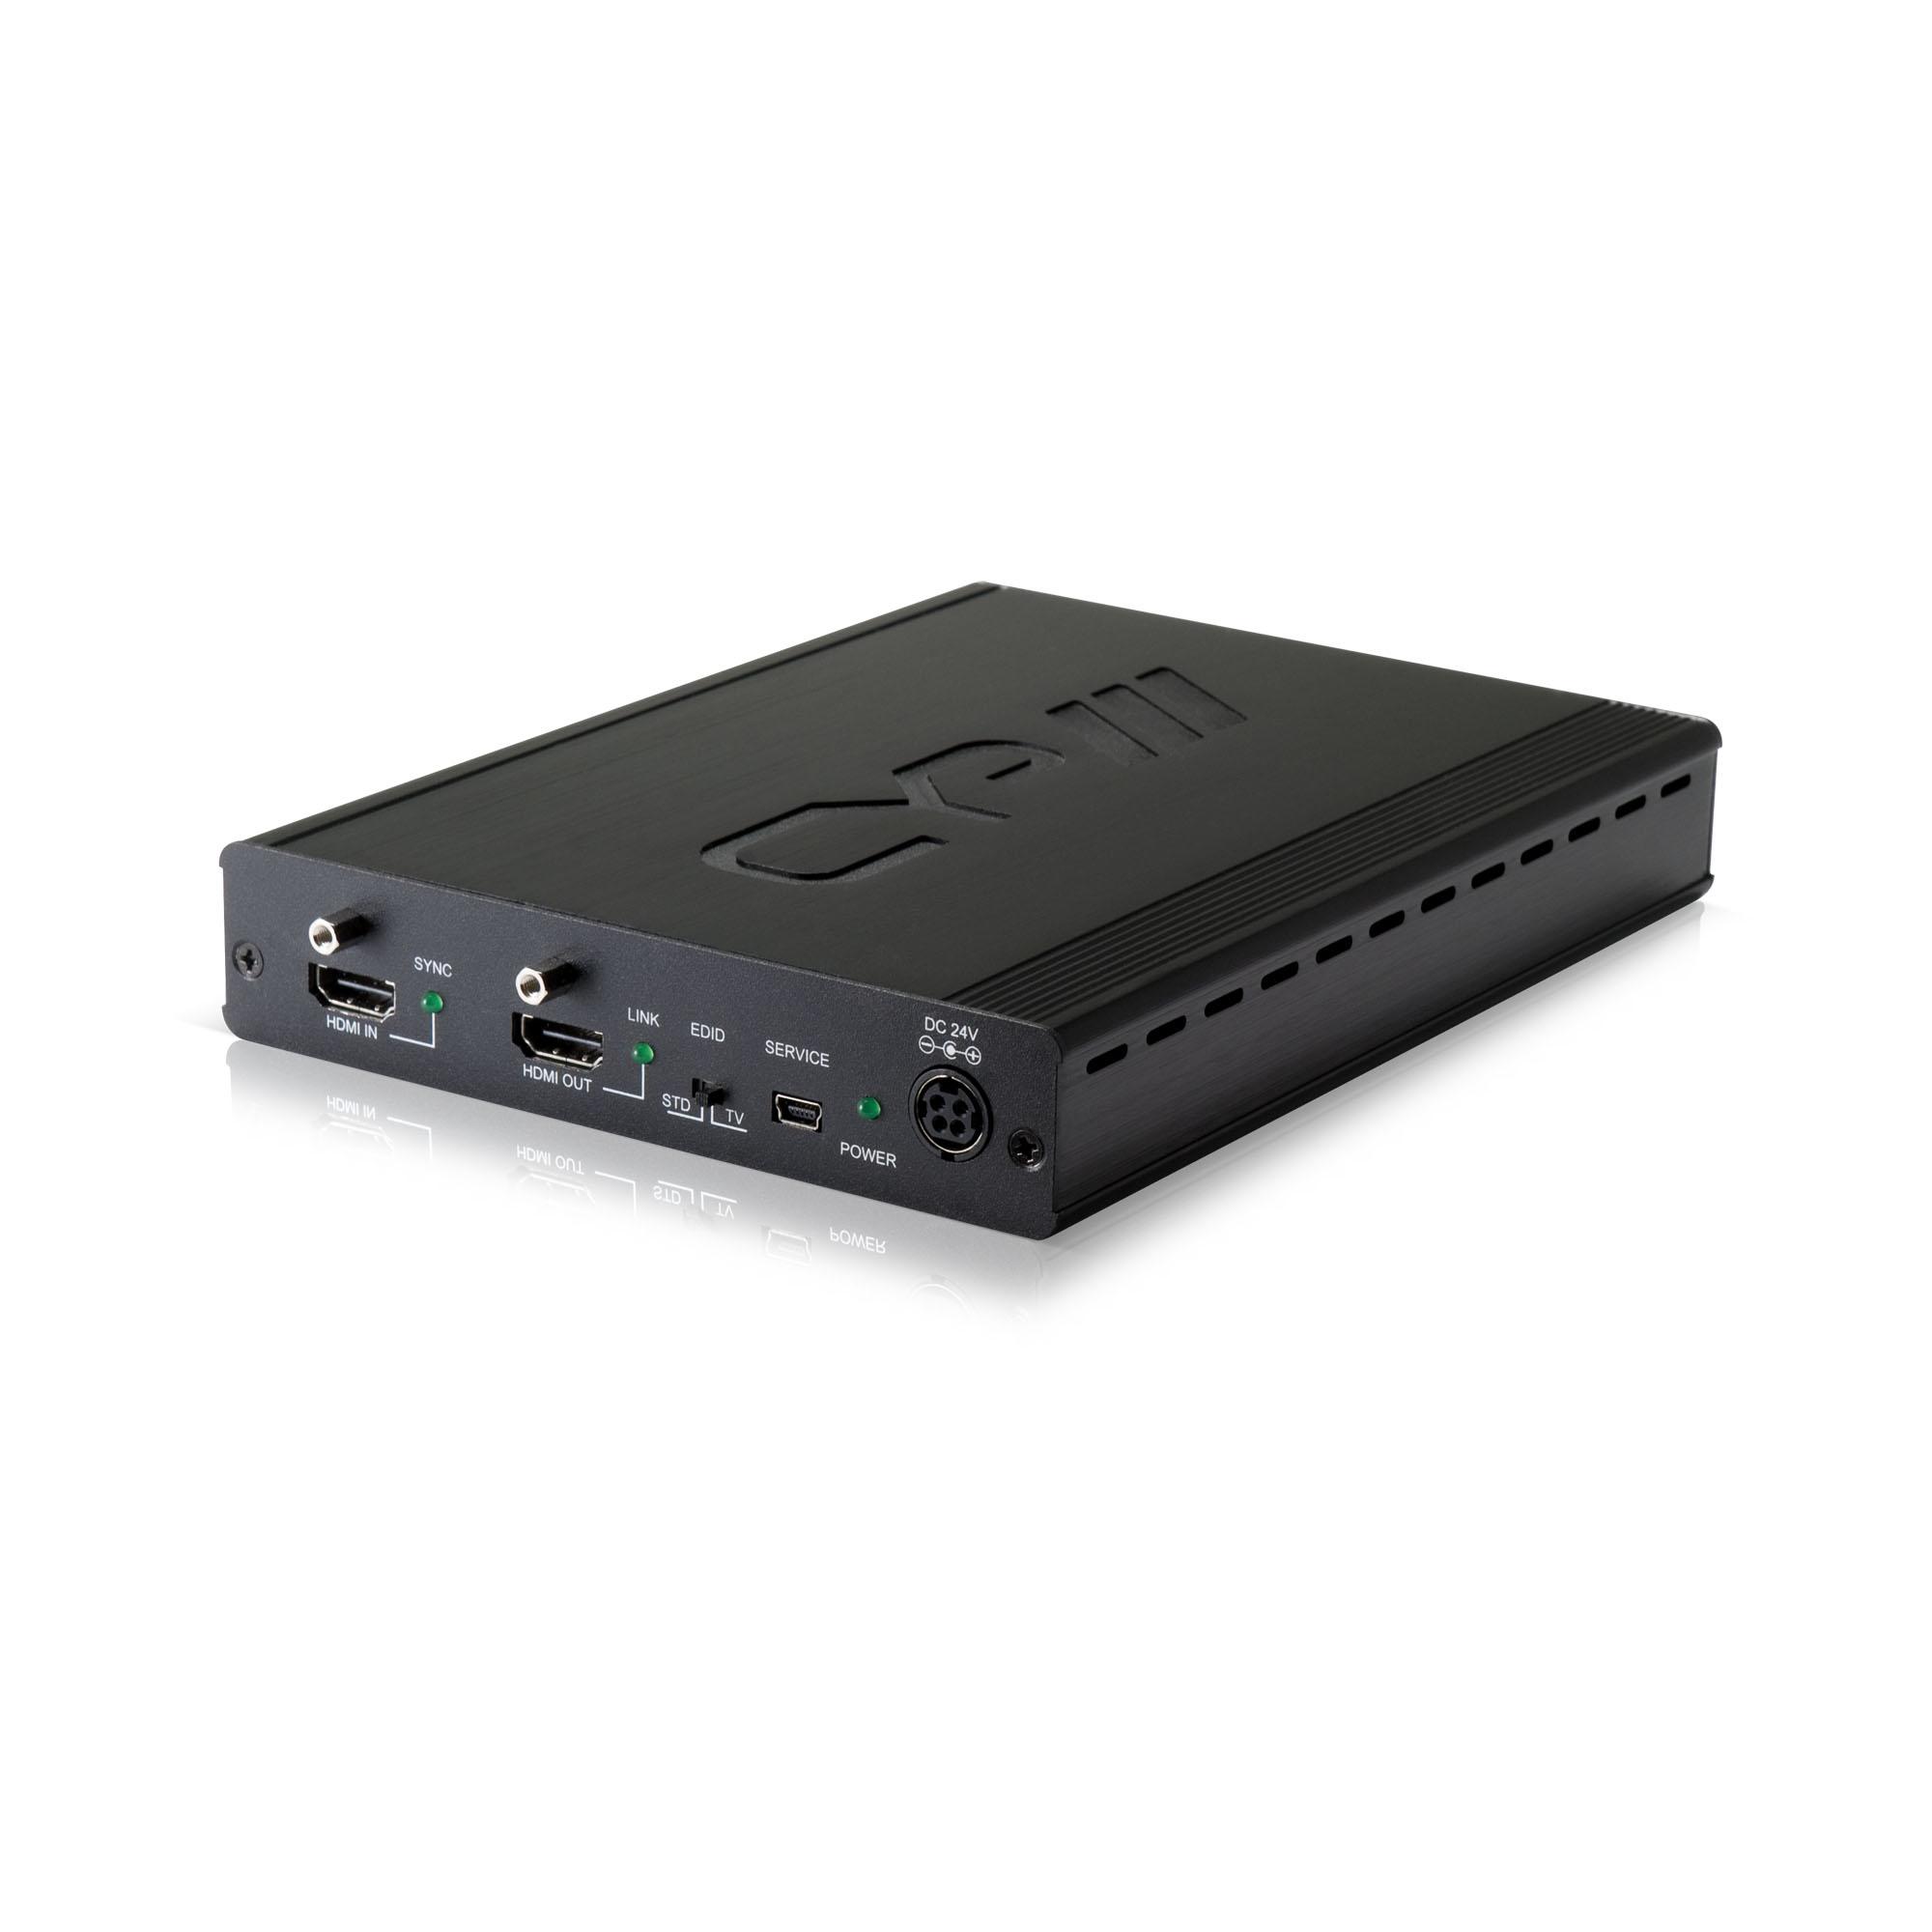 PU-1H3HBTE 1 HDMI to 3 HDBaseT™ Splitter (100m) including HDMI output bypass